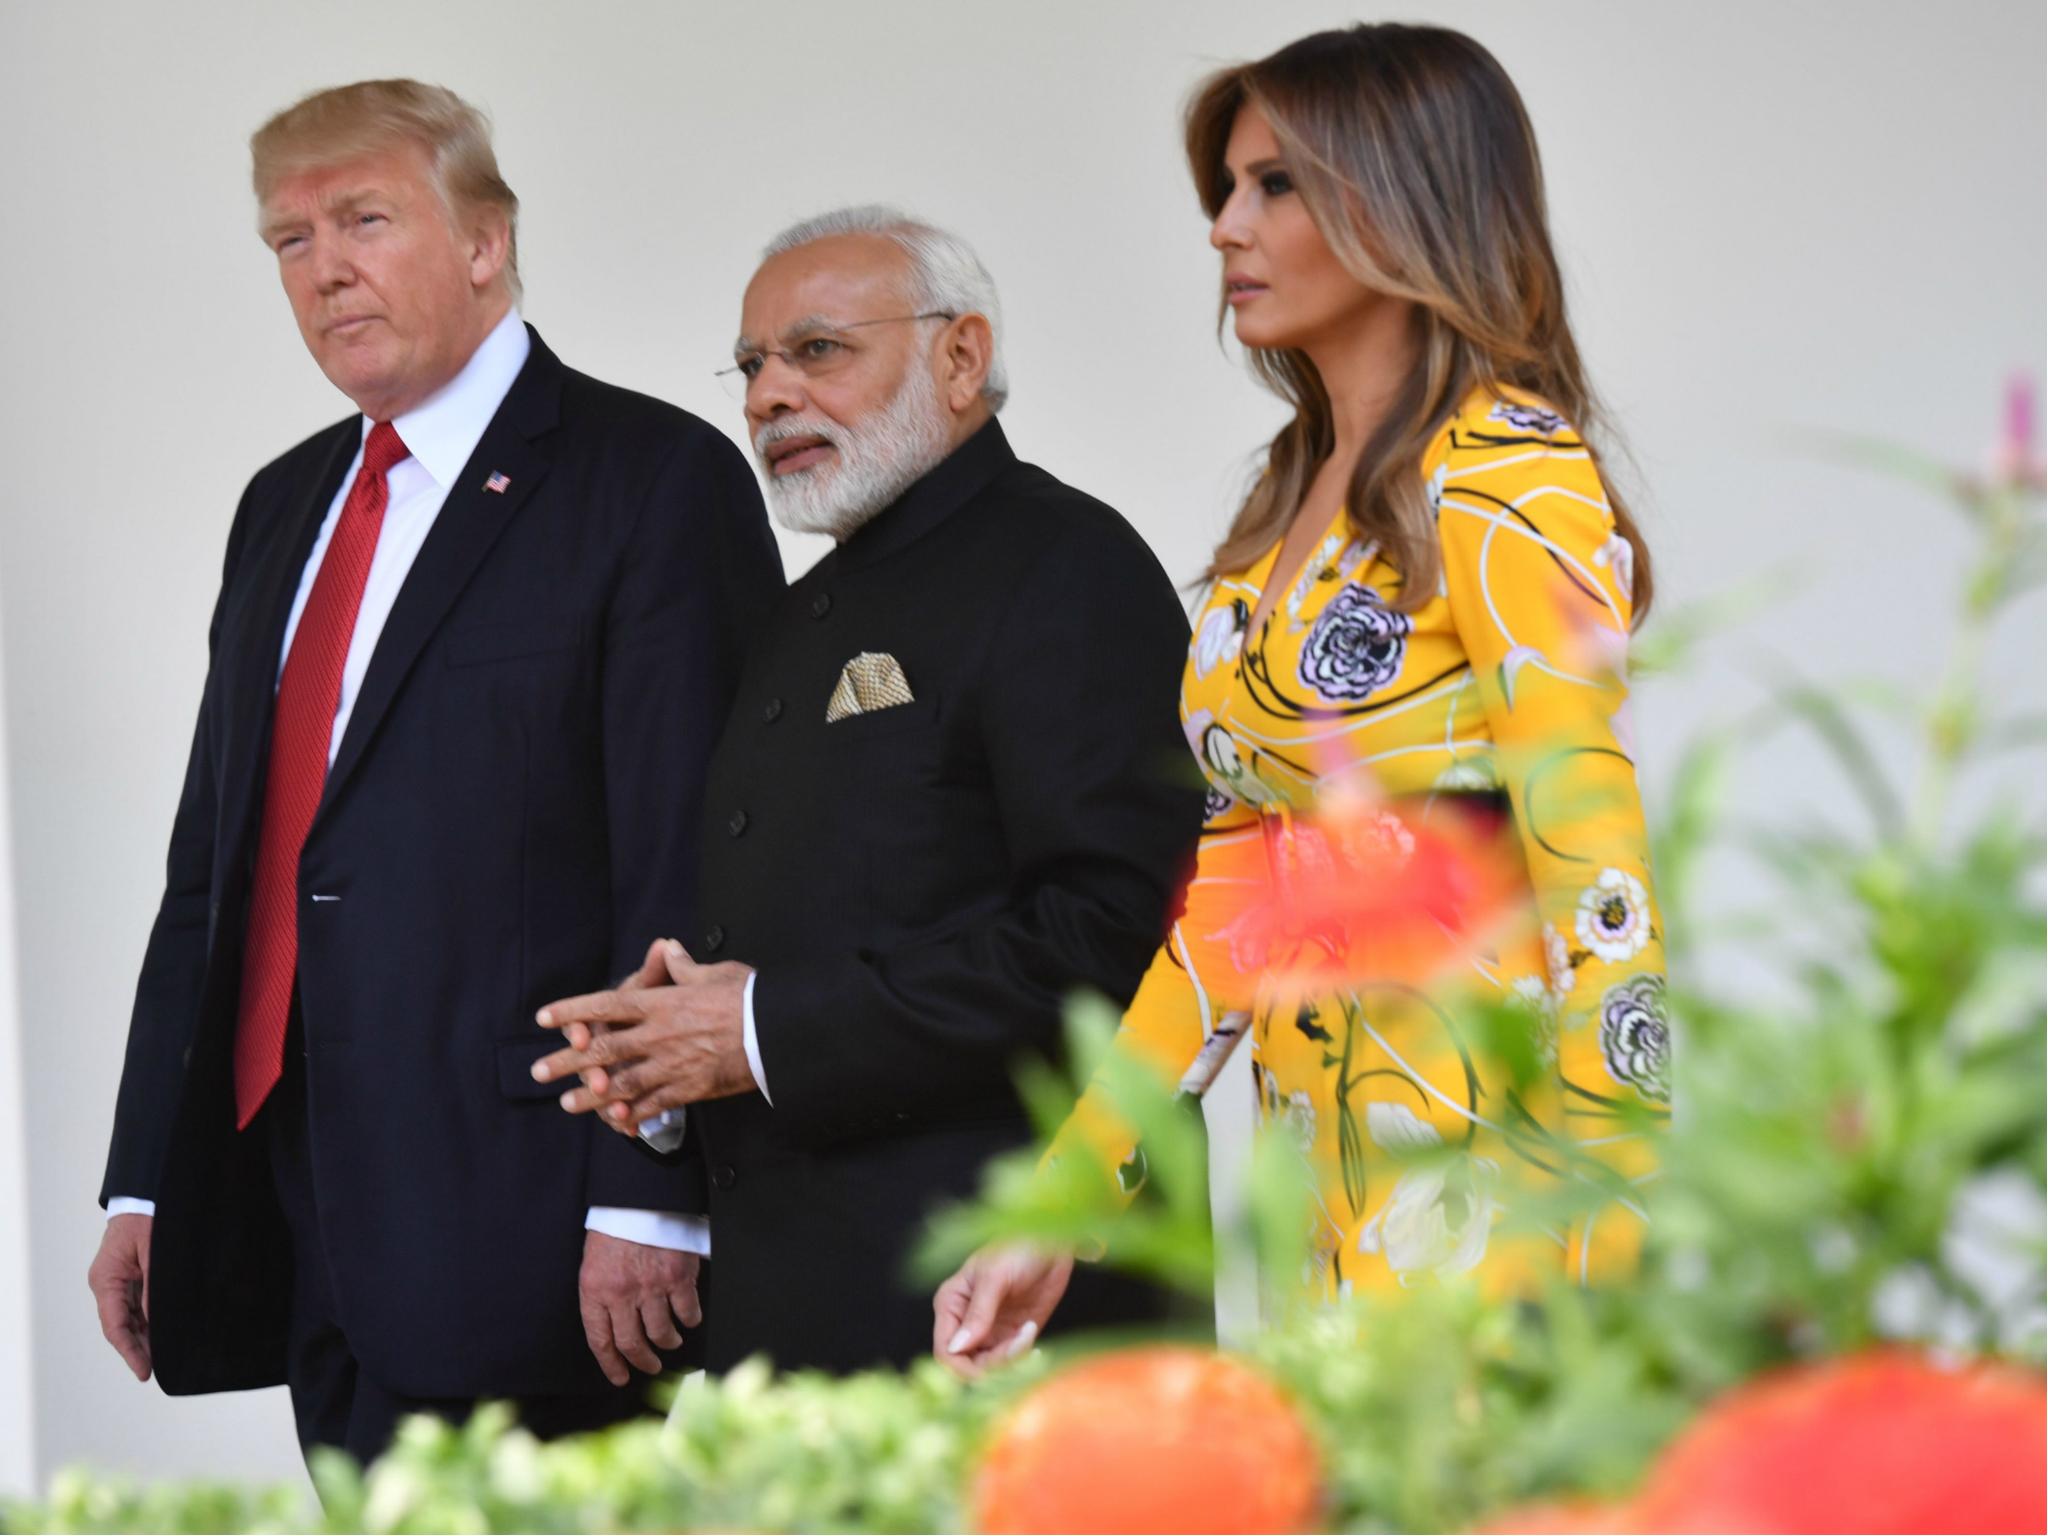 Donald Trump and First Lady Melania Trump meet Indian PM Narendra Modi at the White House